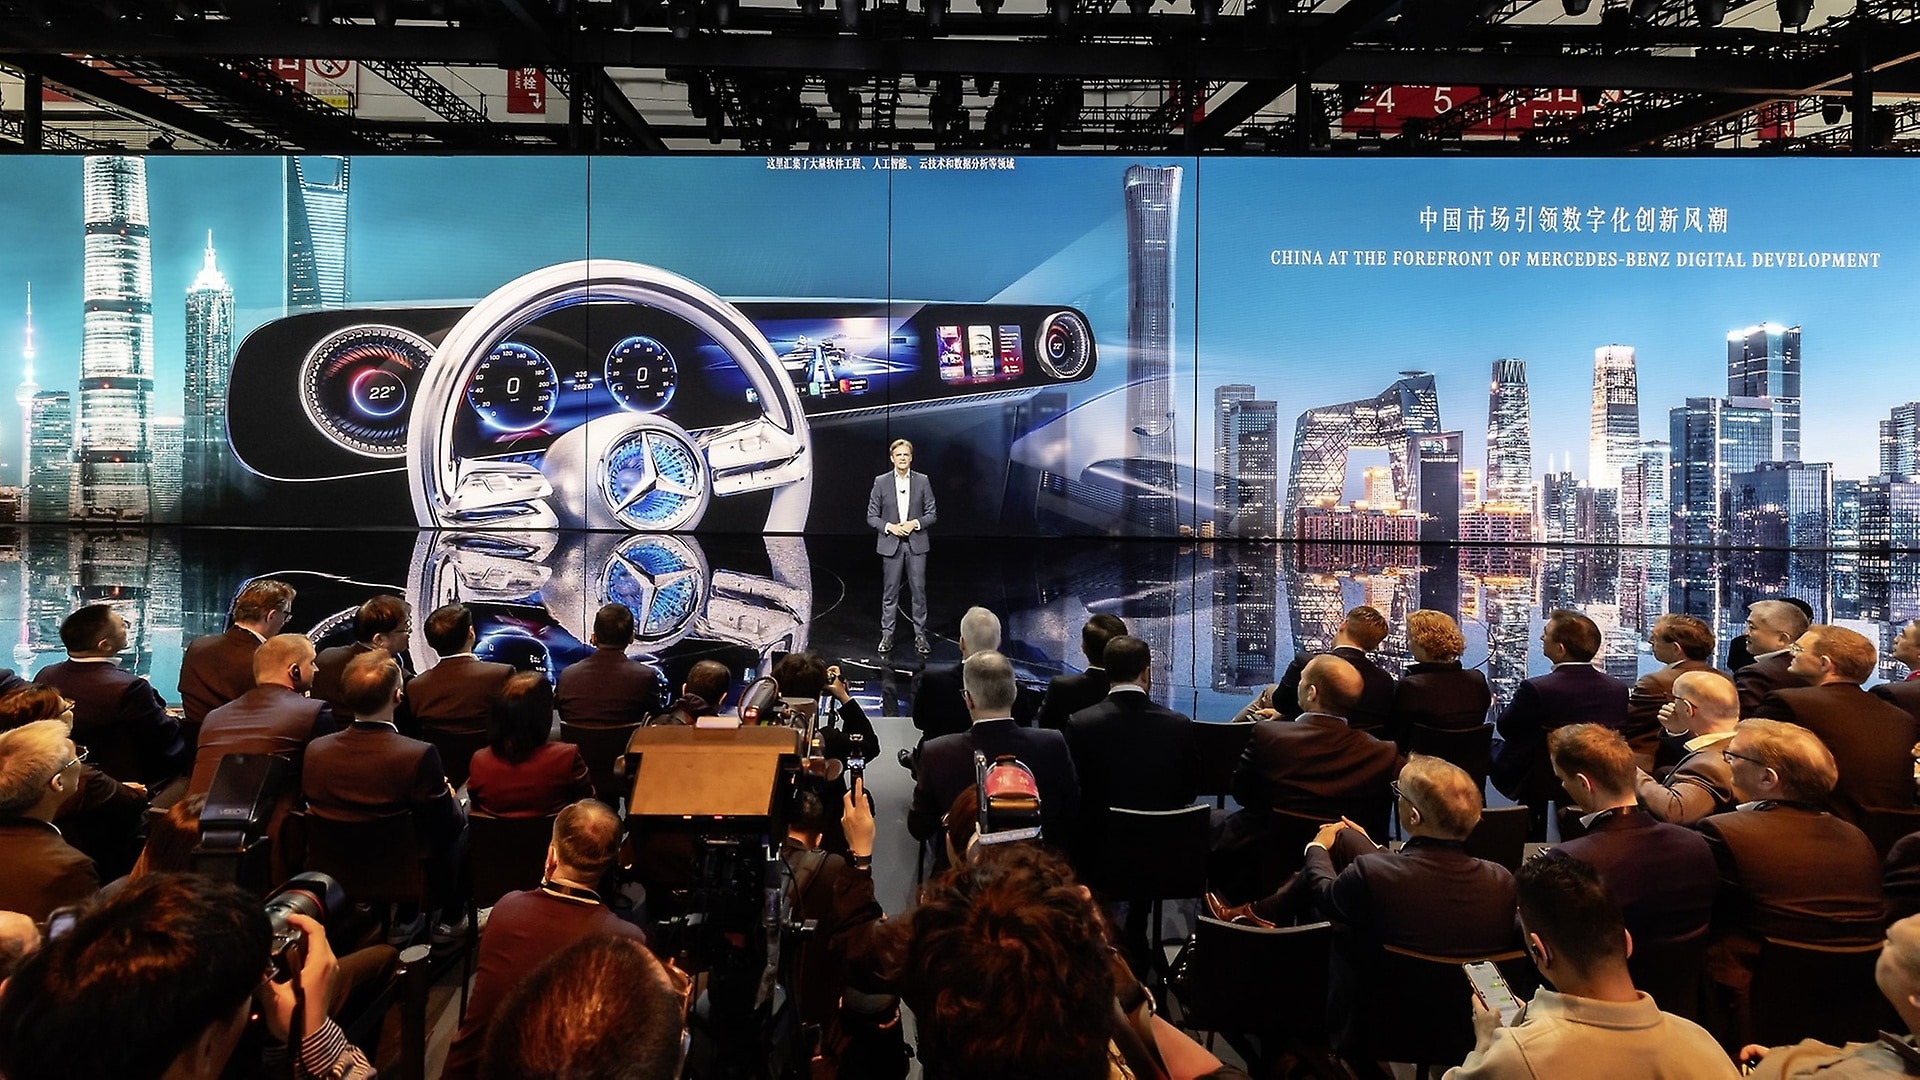 Markus Schäfer: "Our R&D teams in China make a significant contribution to our rapid progress in AI, autonomous driving and cutting-edge software in the world’s biggest car market."